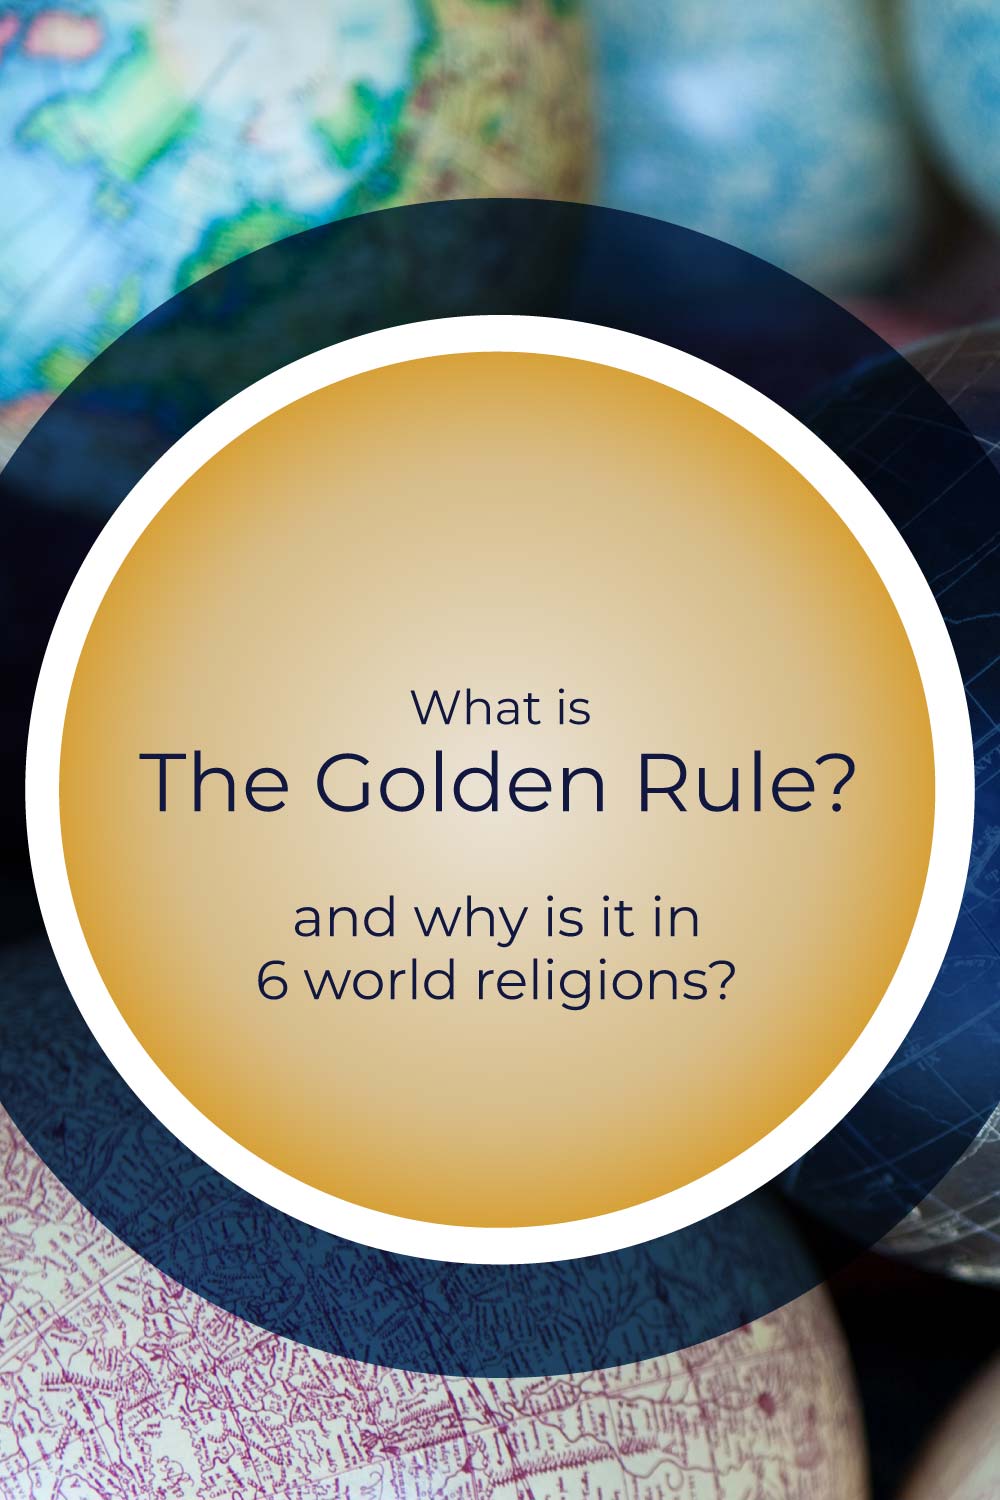 What is the Golden Rule and where did it come from